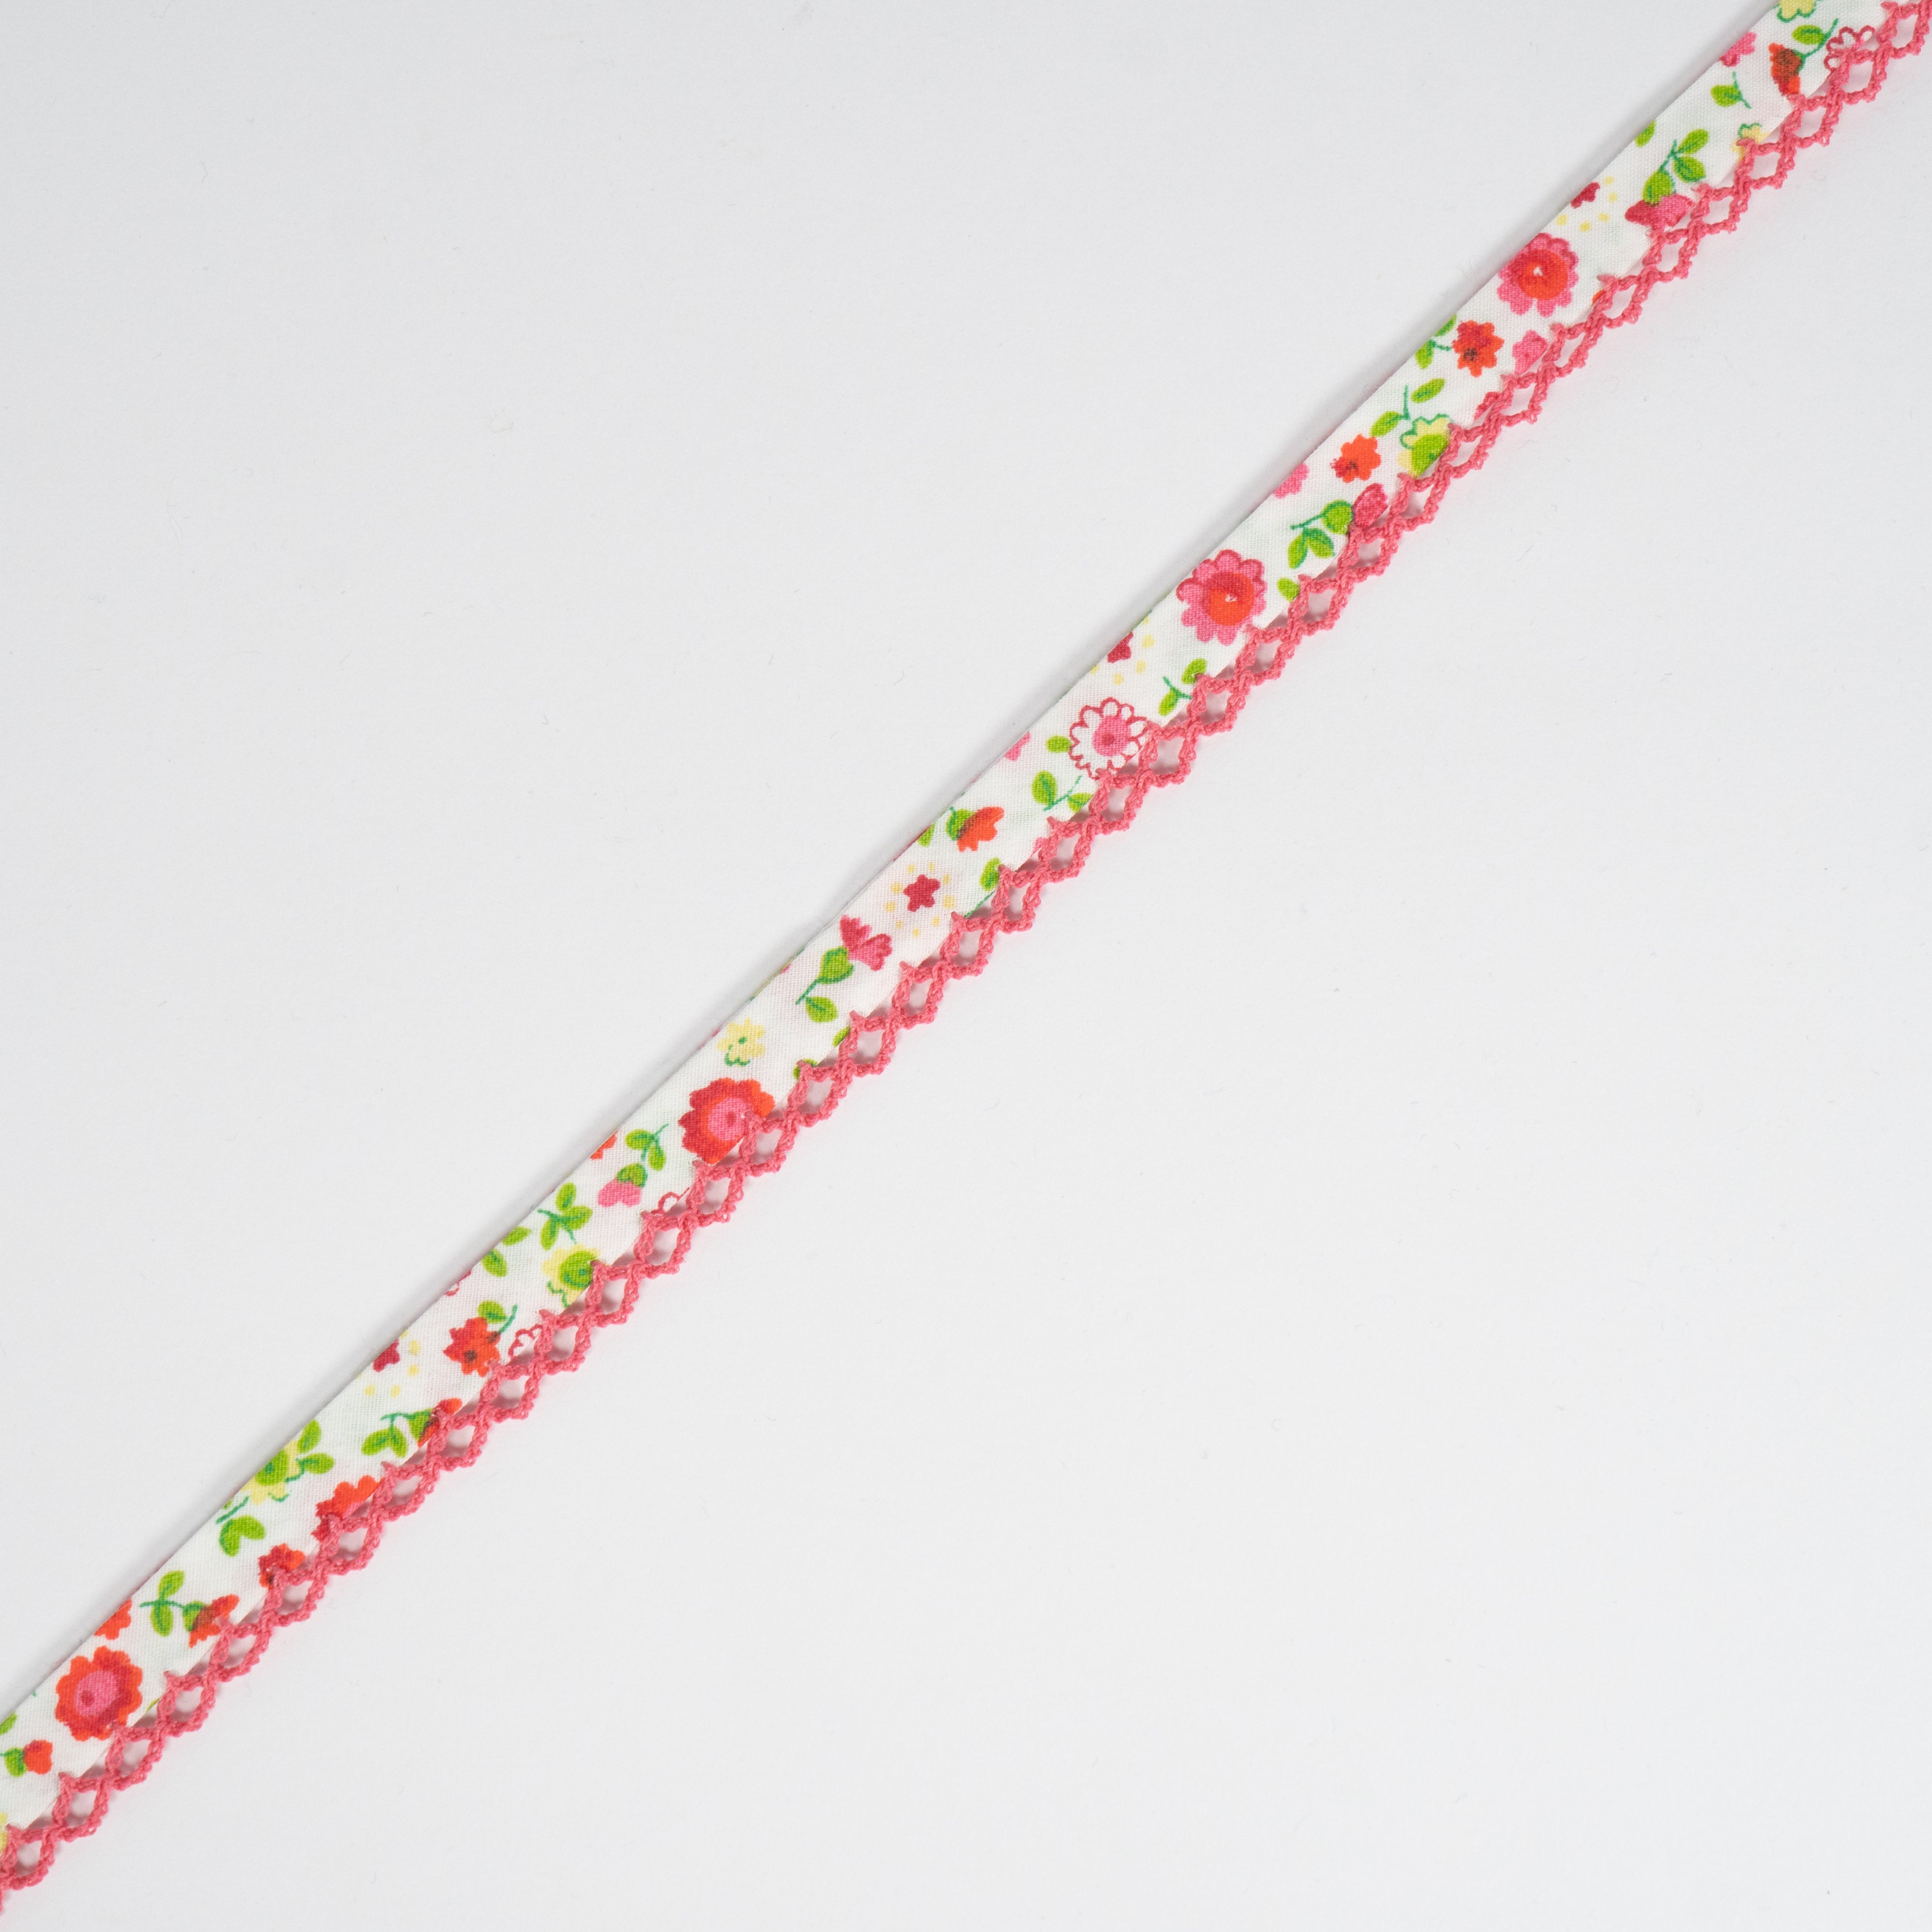 Pink Floral | Lace Edged Patterned Bias Binding | 12mm